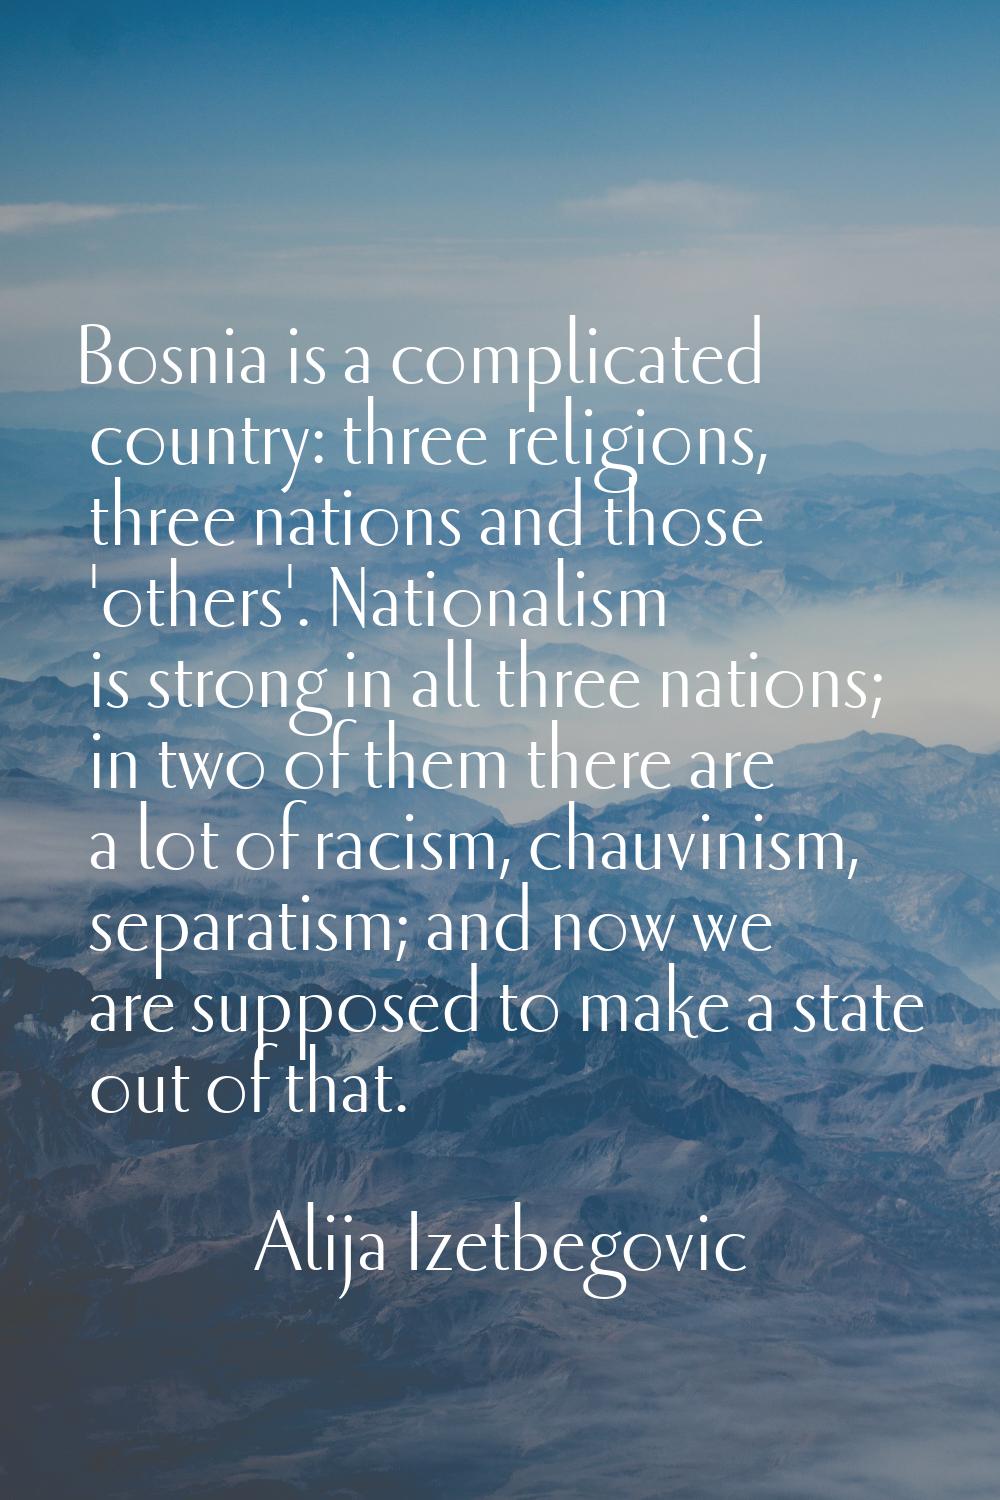 Bosnia is a complicated country: three religions, three nations and those 'others'. Nationalism is 